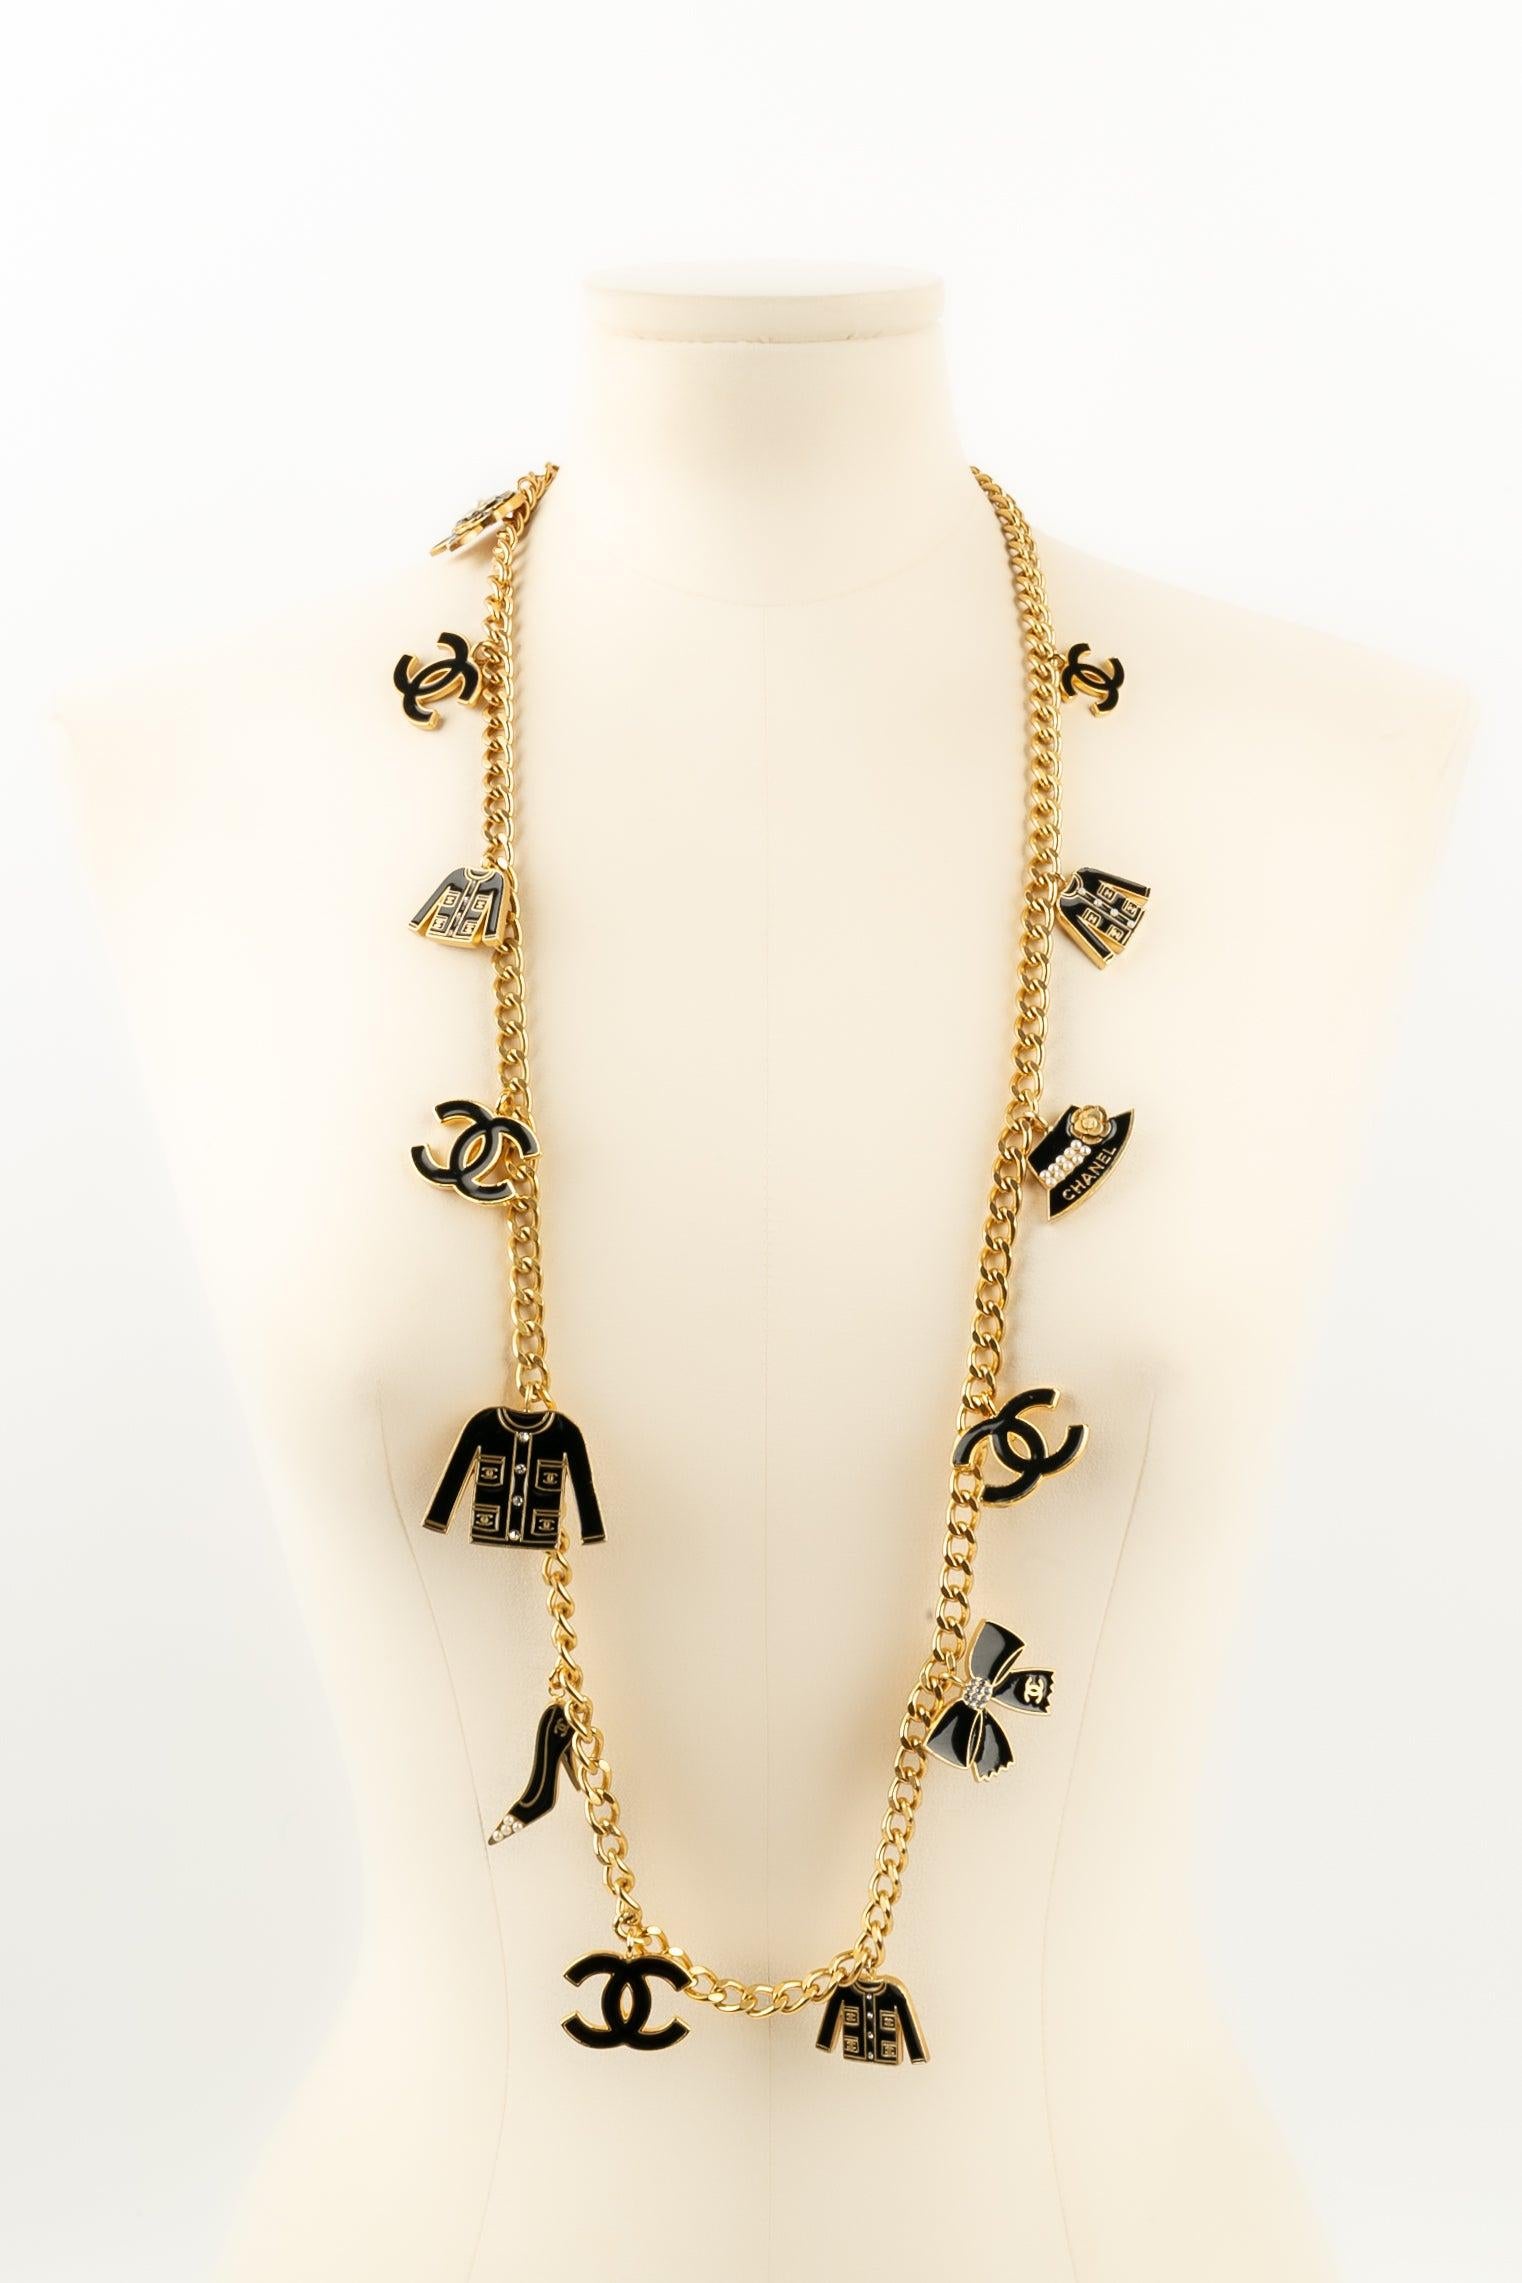 Chanel Long Necklace in Gold-Plated Metal and Charms, 2002 For Sale 3